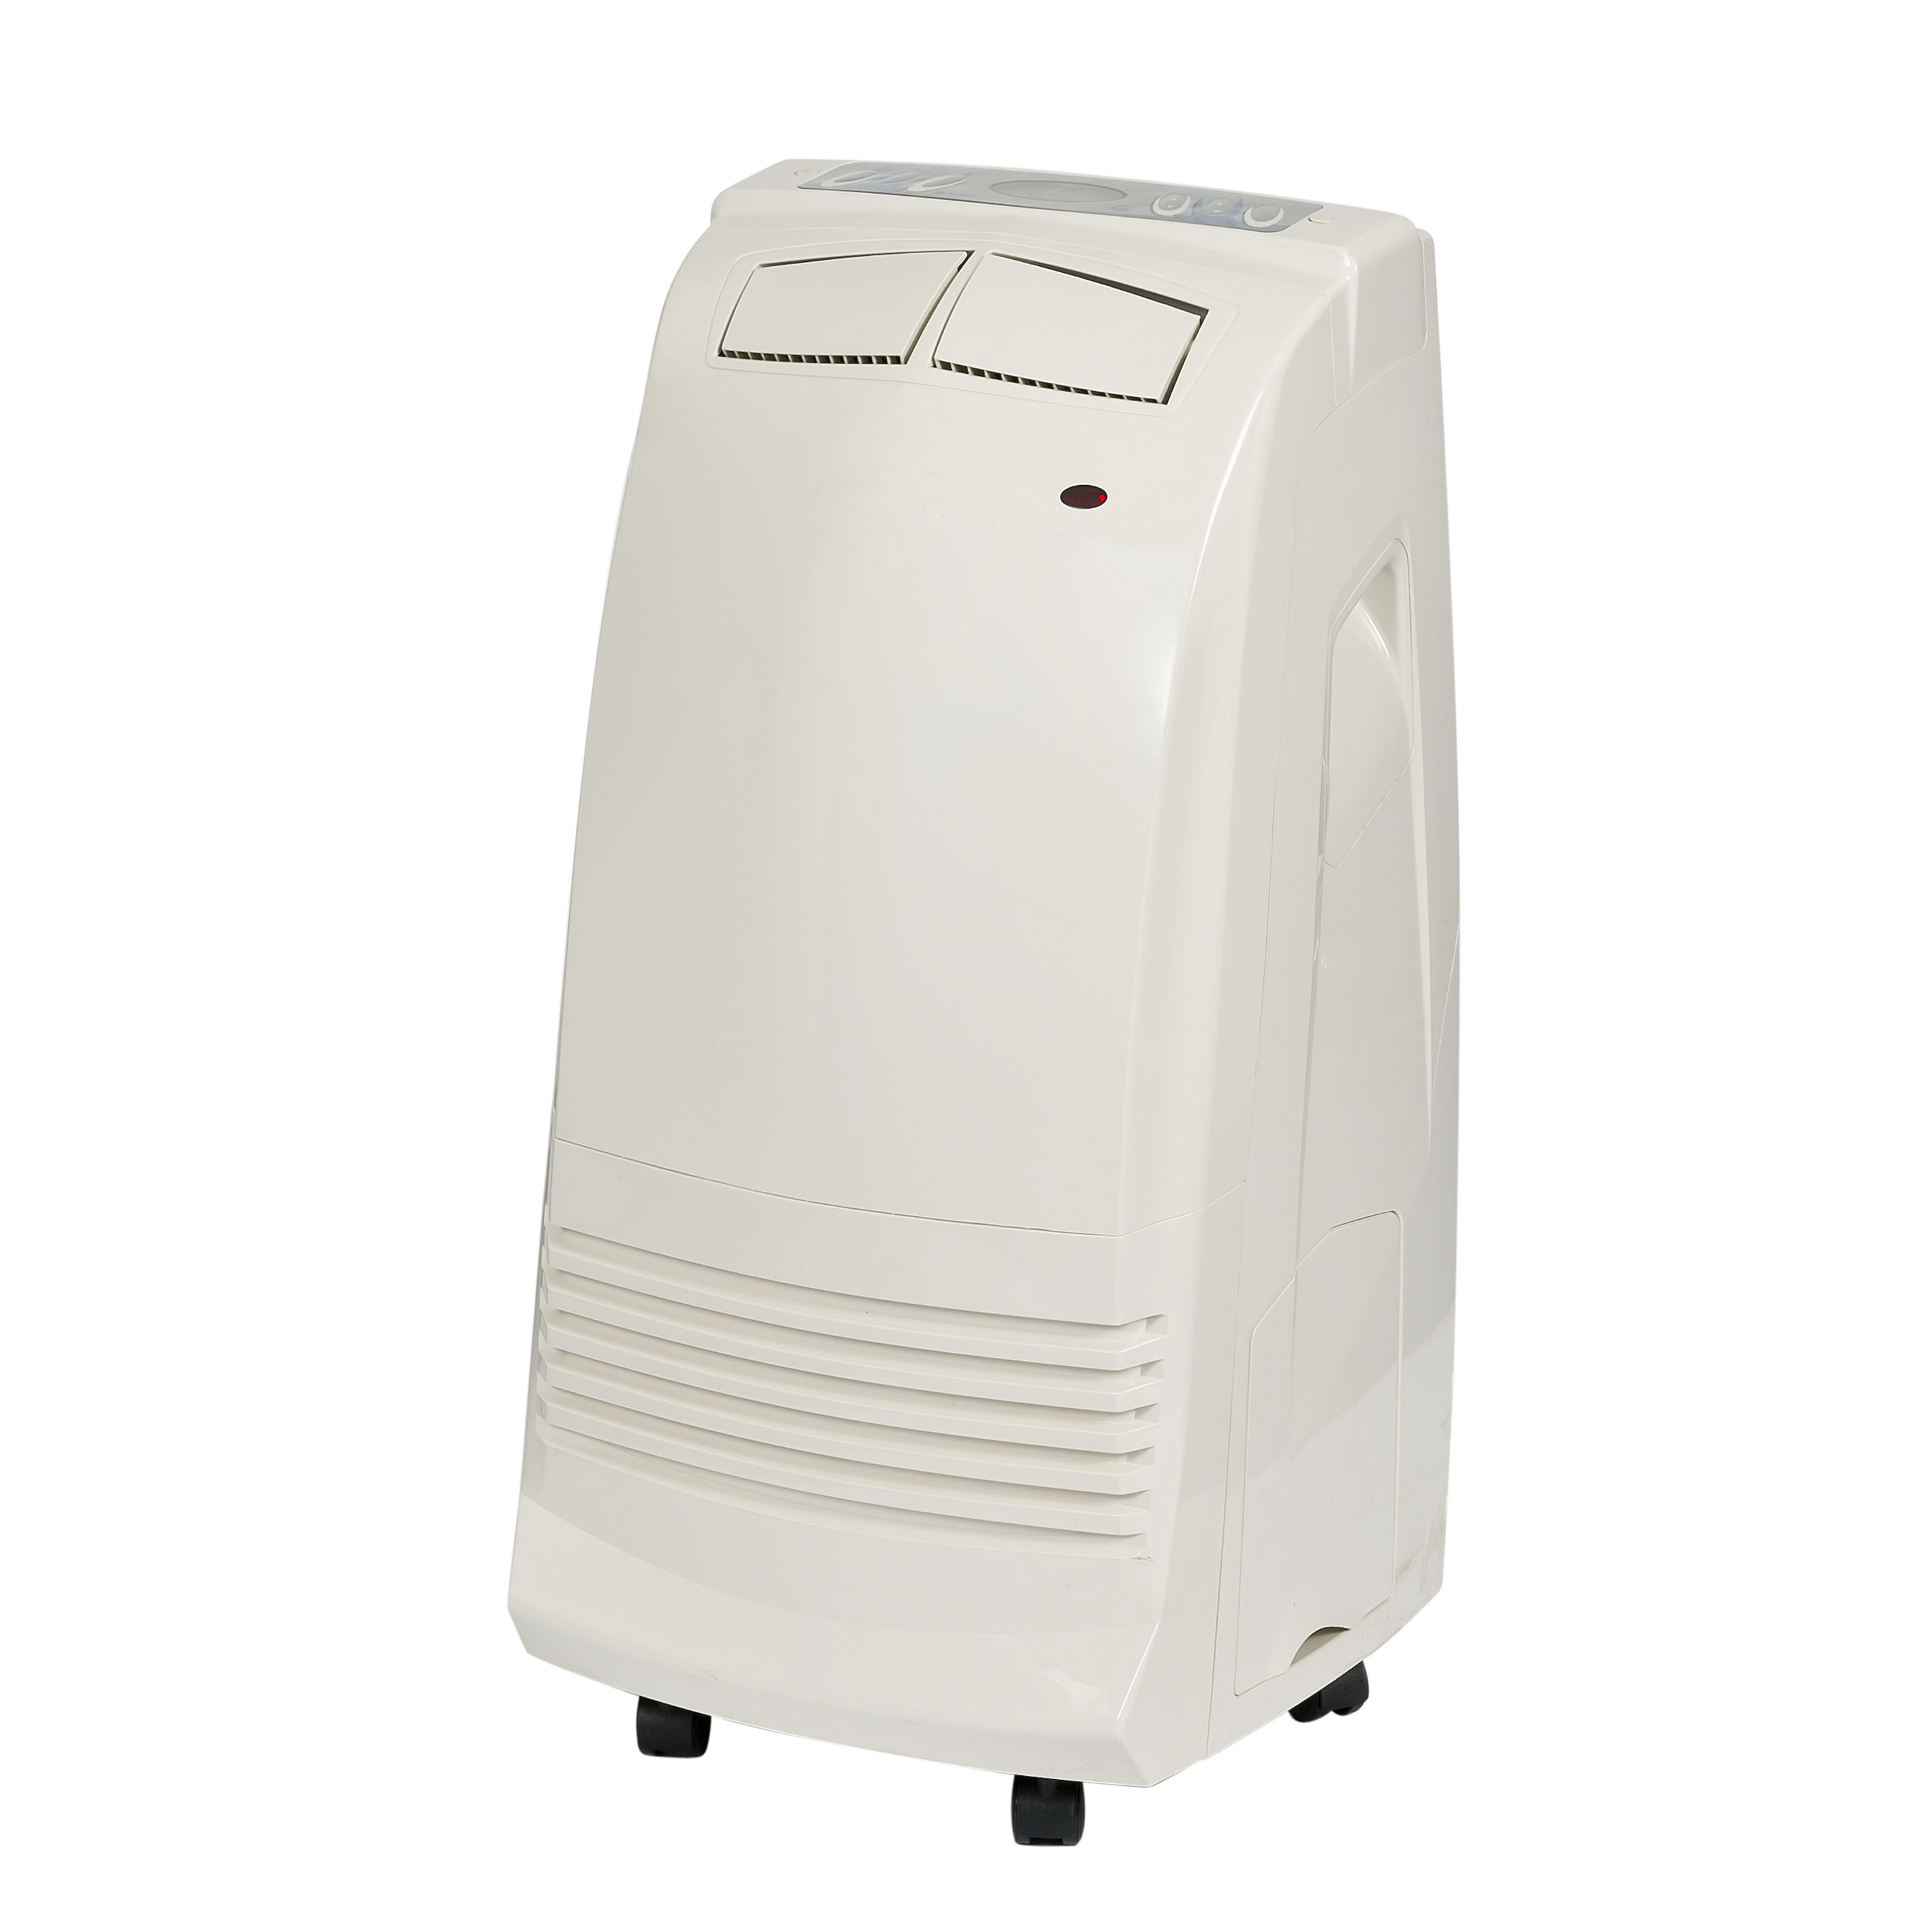 Gree 3 2kw Hire Portable Air Conditioner Day Delivery 5kw